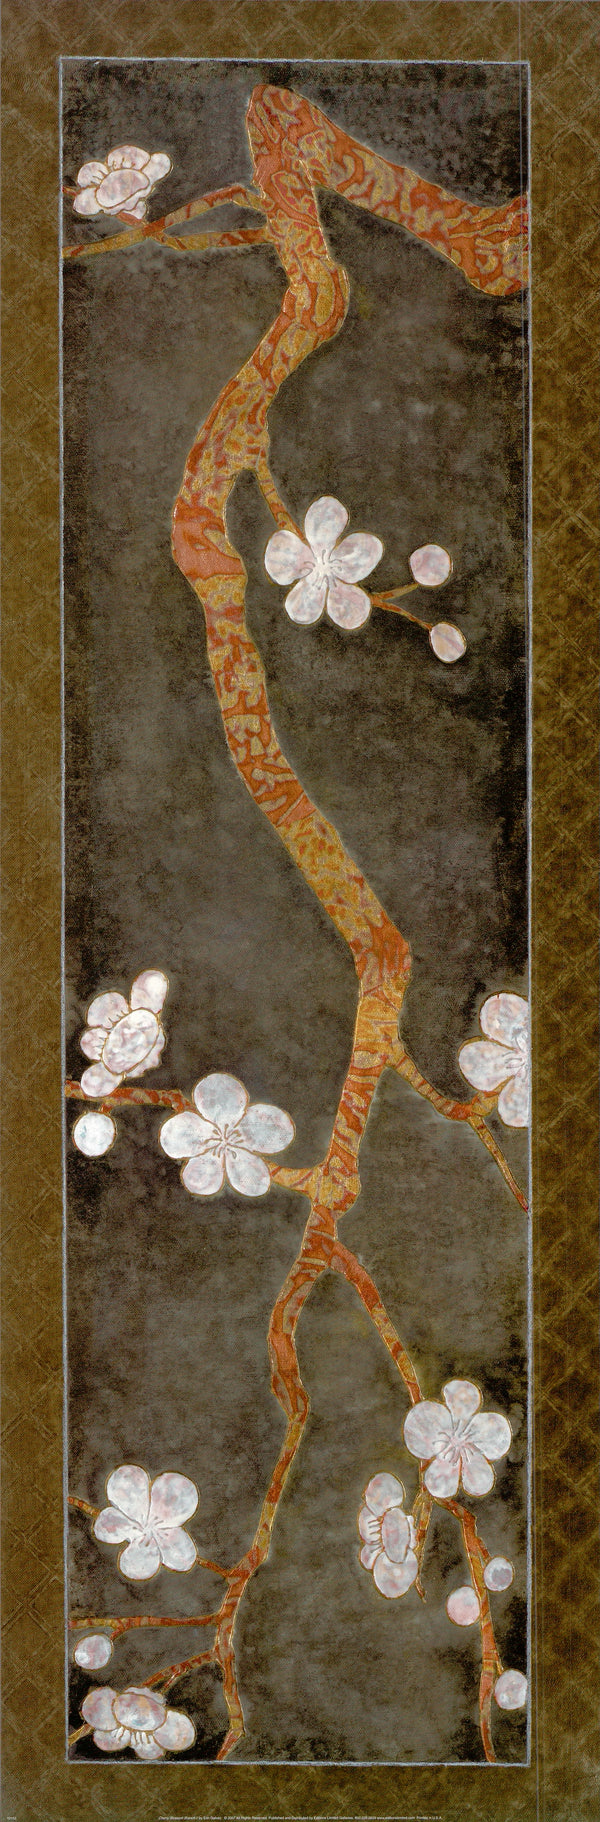 Cherry Blossom Branch I by Erin Galvez - 12 X 36 Inches (Art Print)